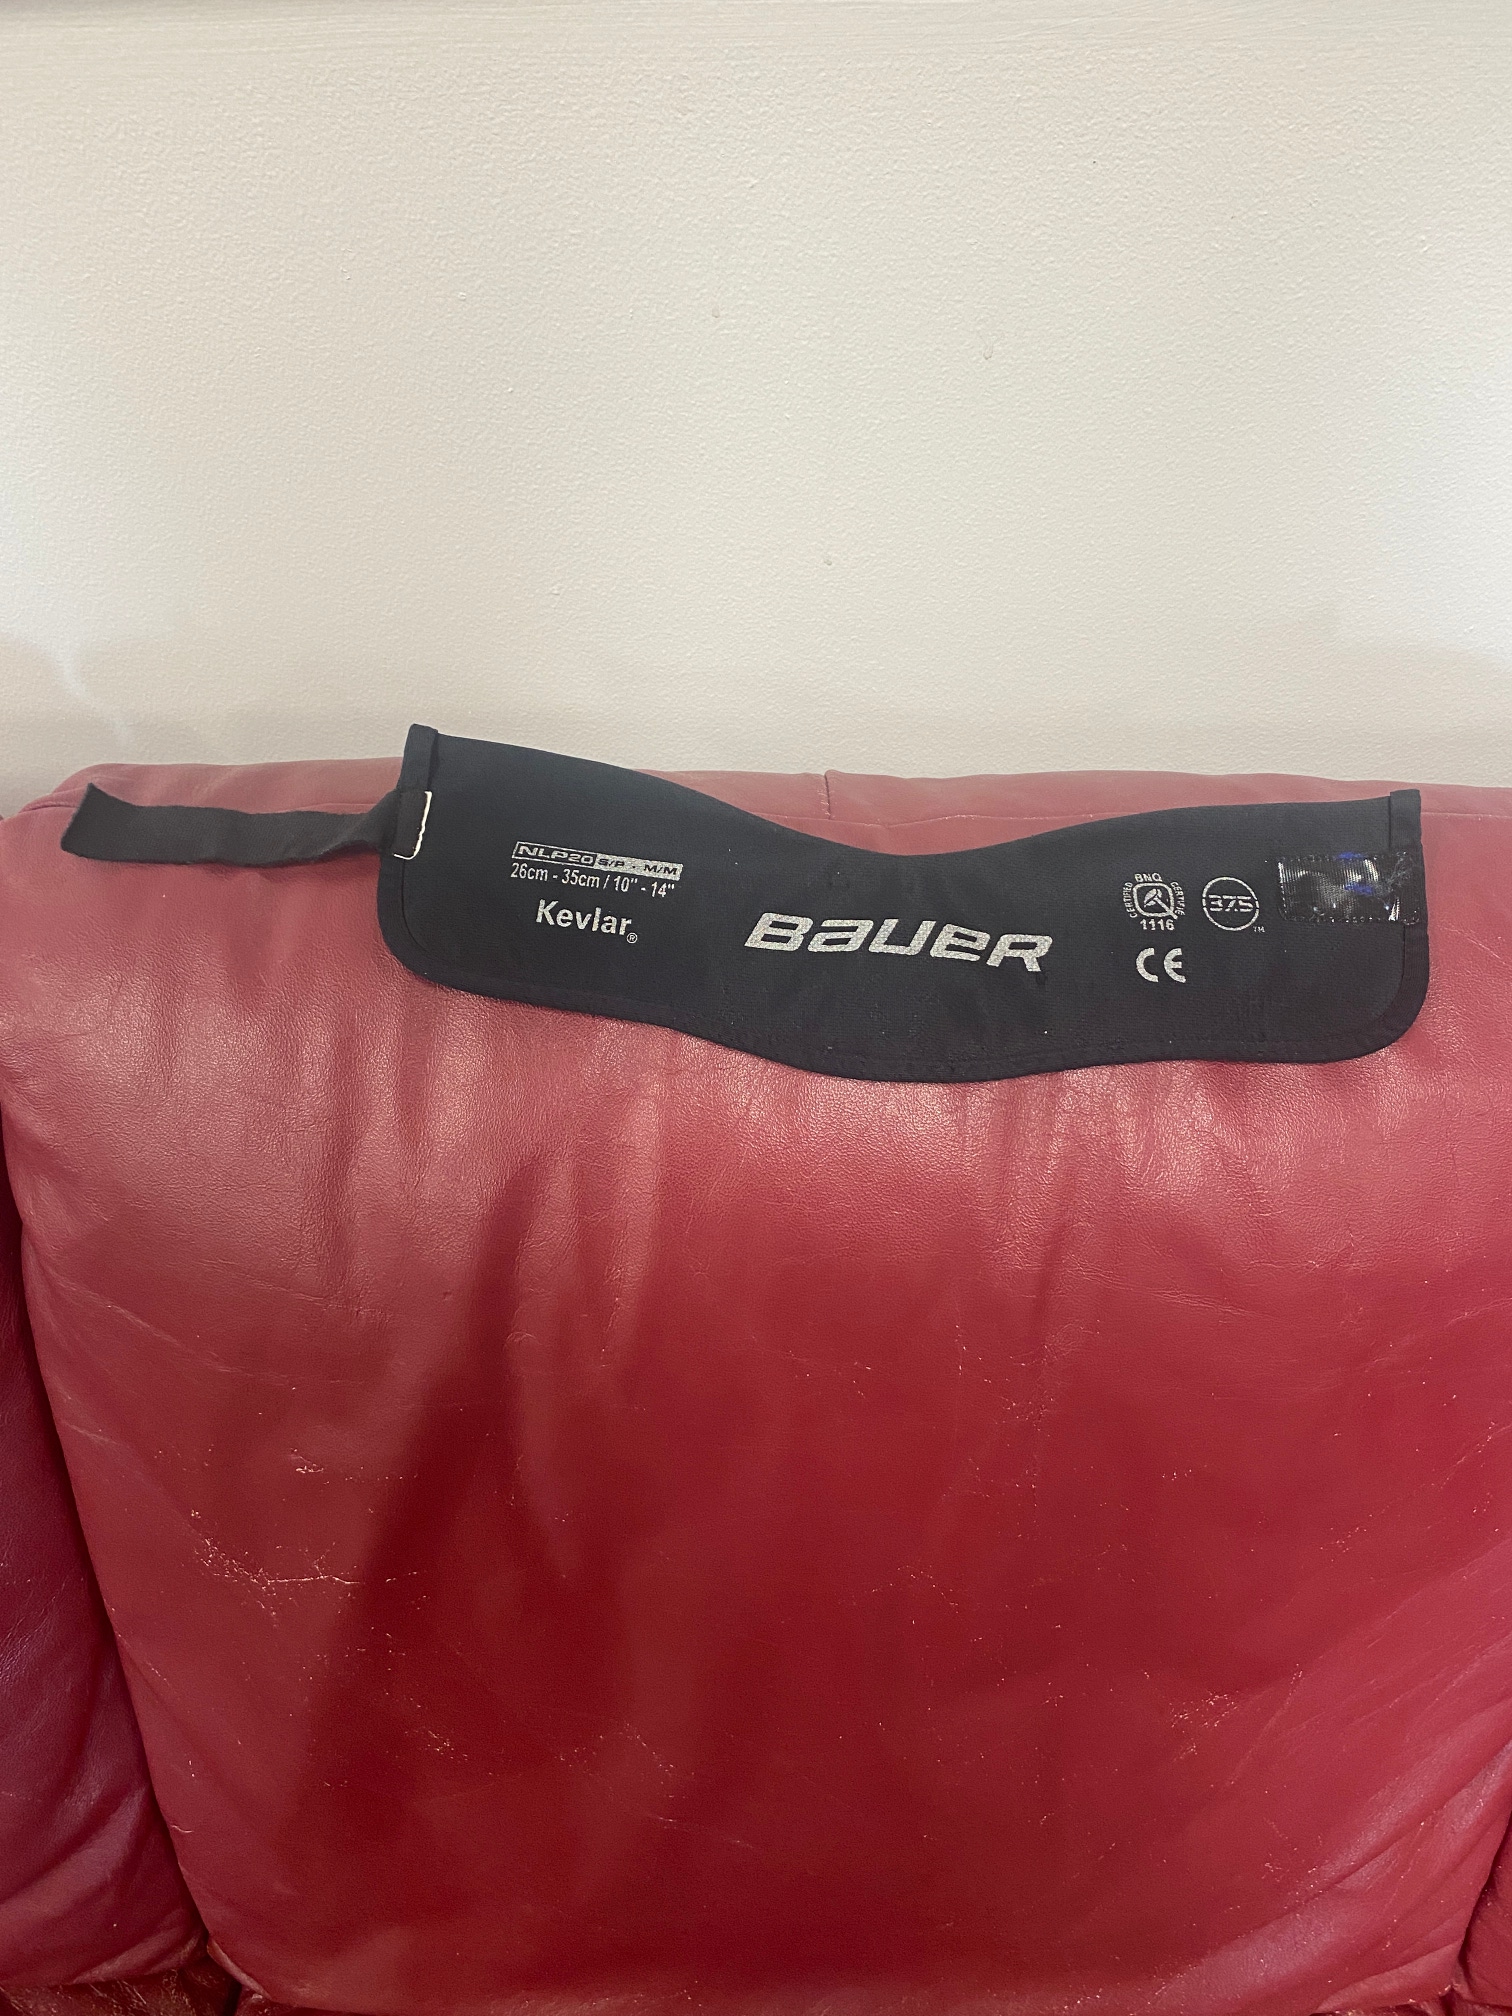 Used Bauer neck guard